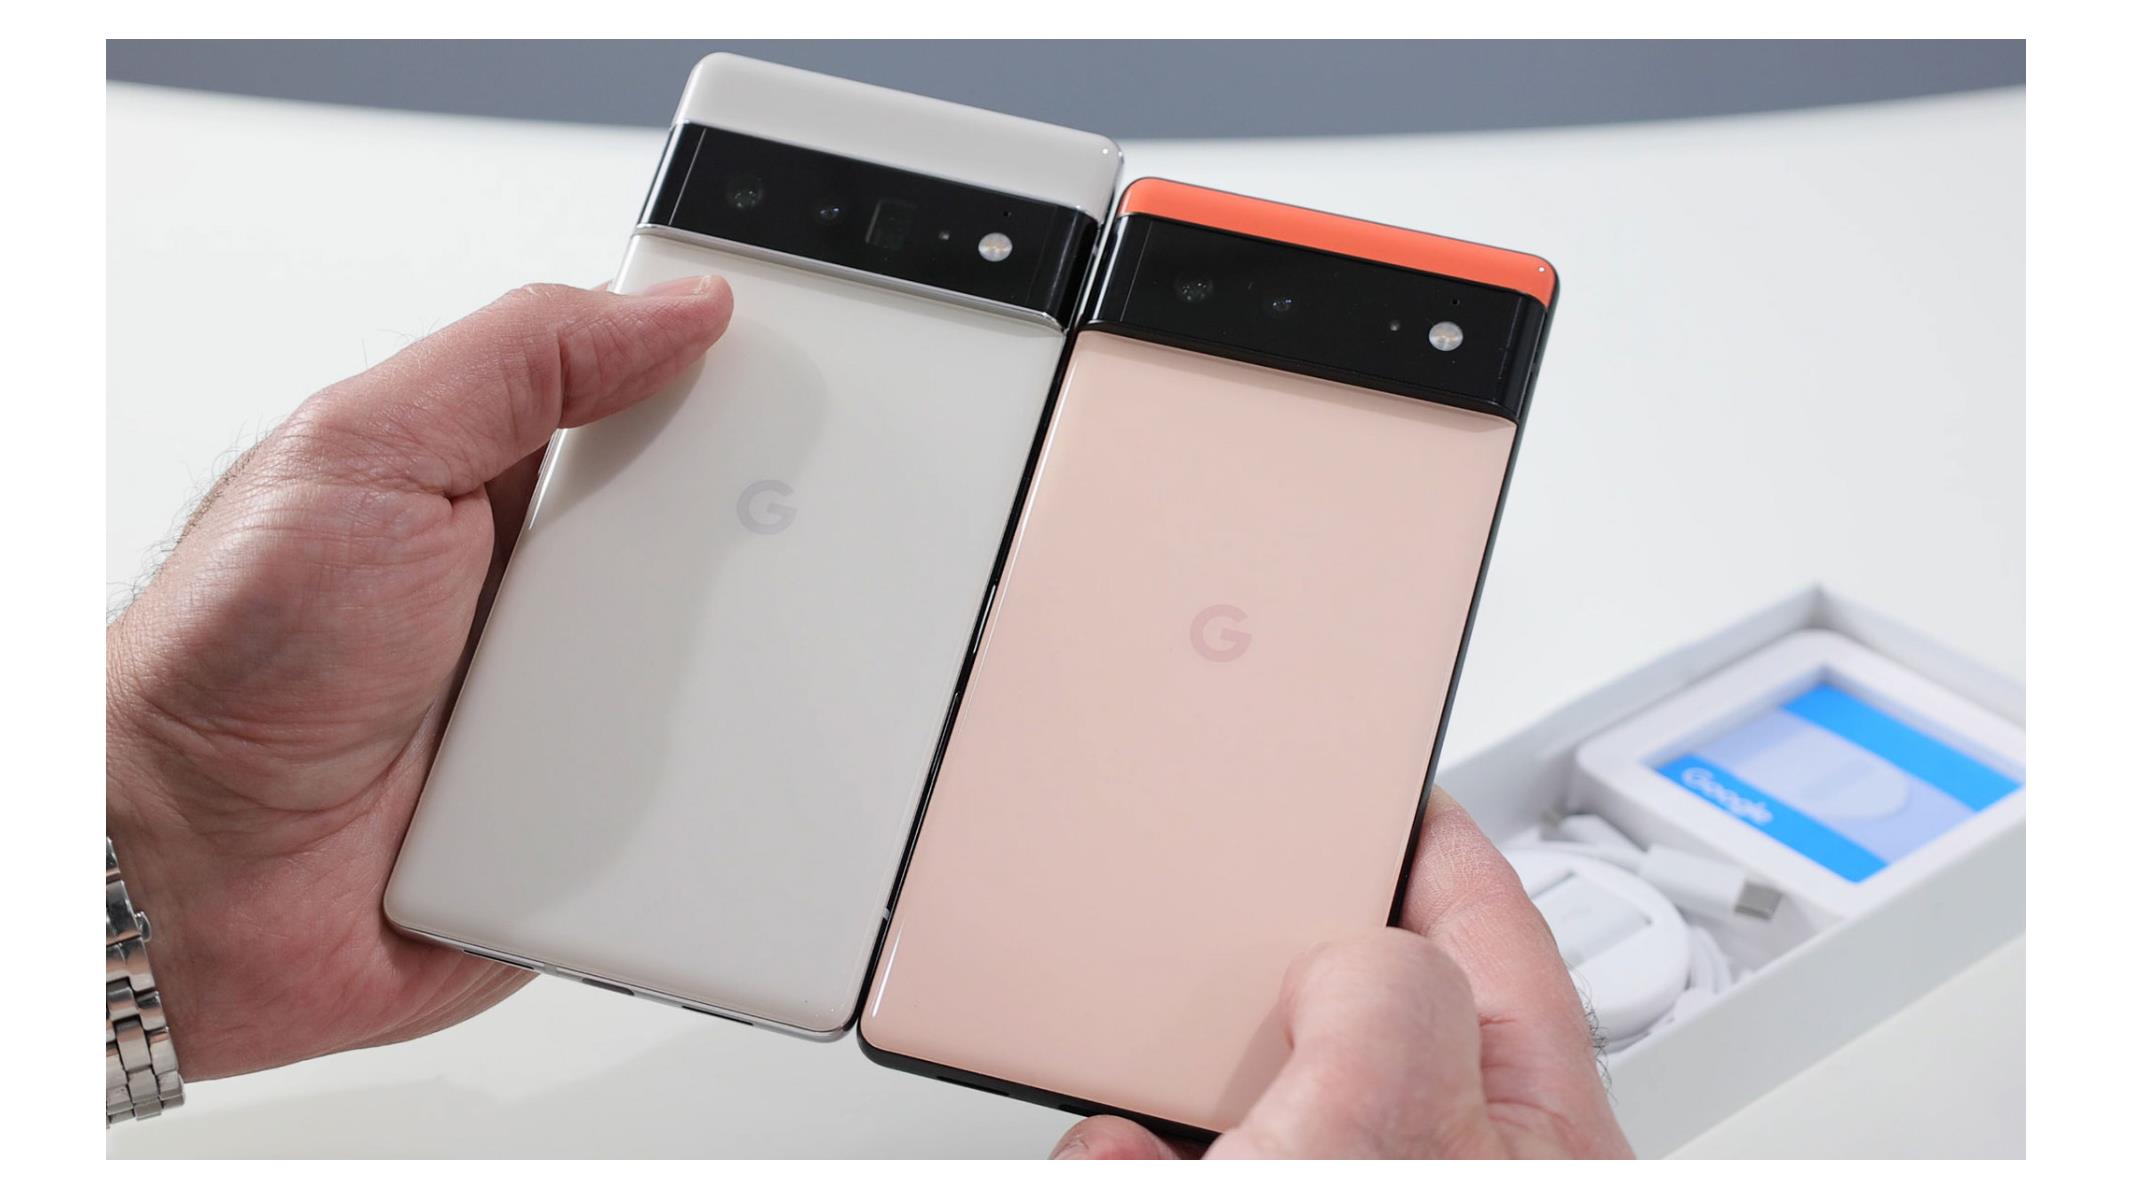 Pixel 6 And Pixel 6 Pro First Look: A Guided Tour Of Google's Android 12  Flagships | HotHardware